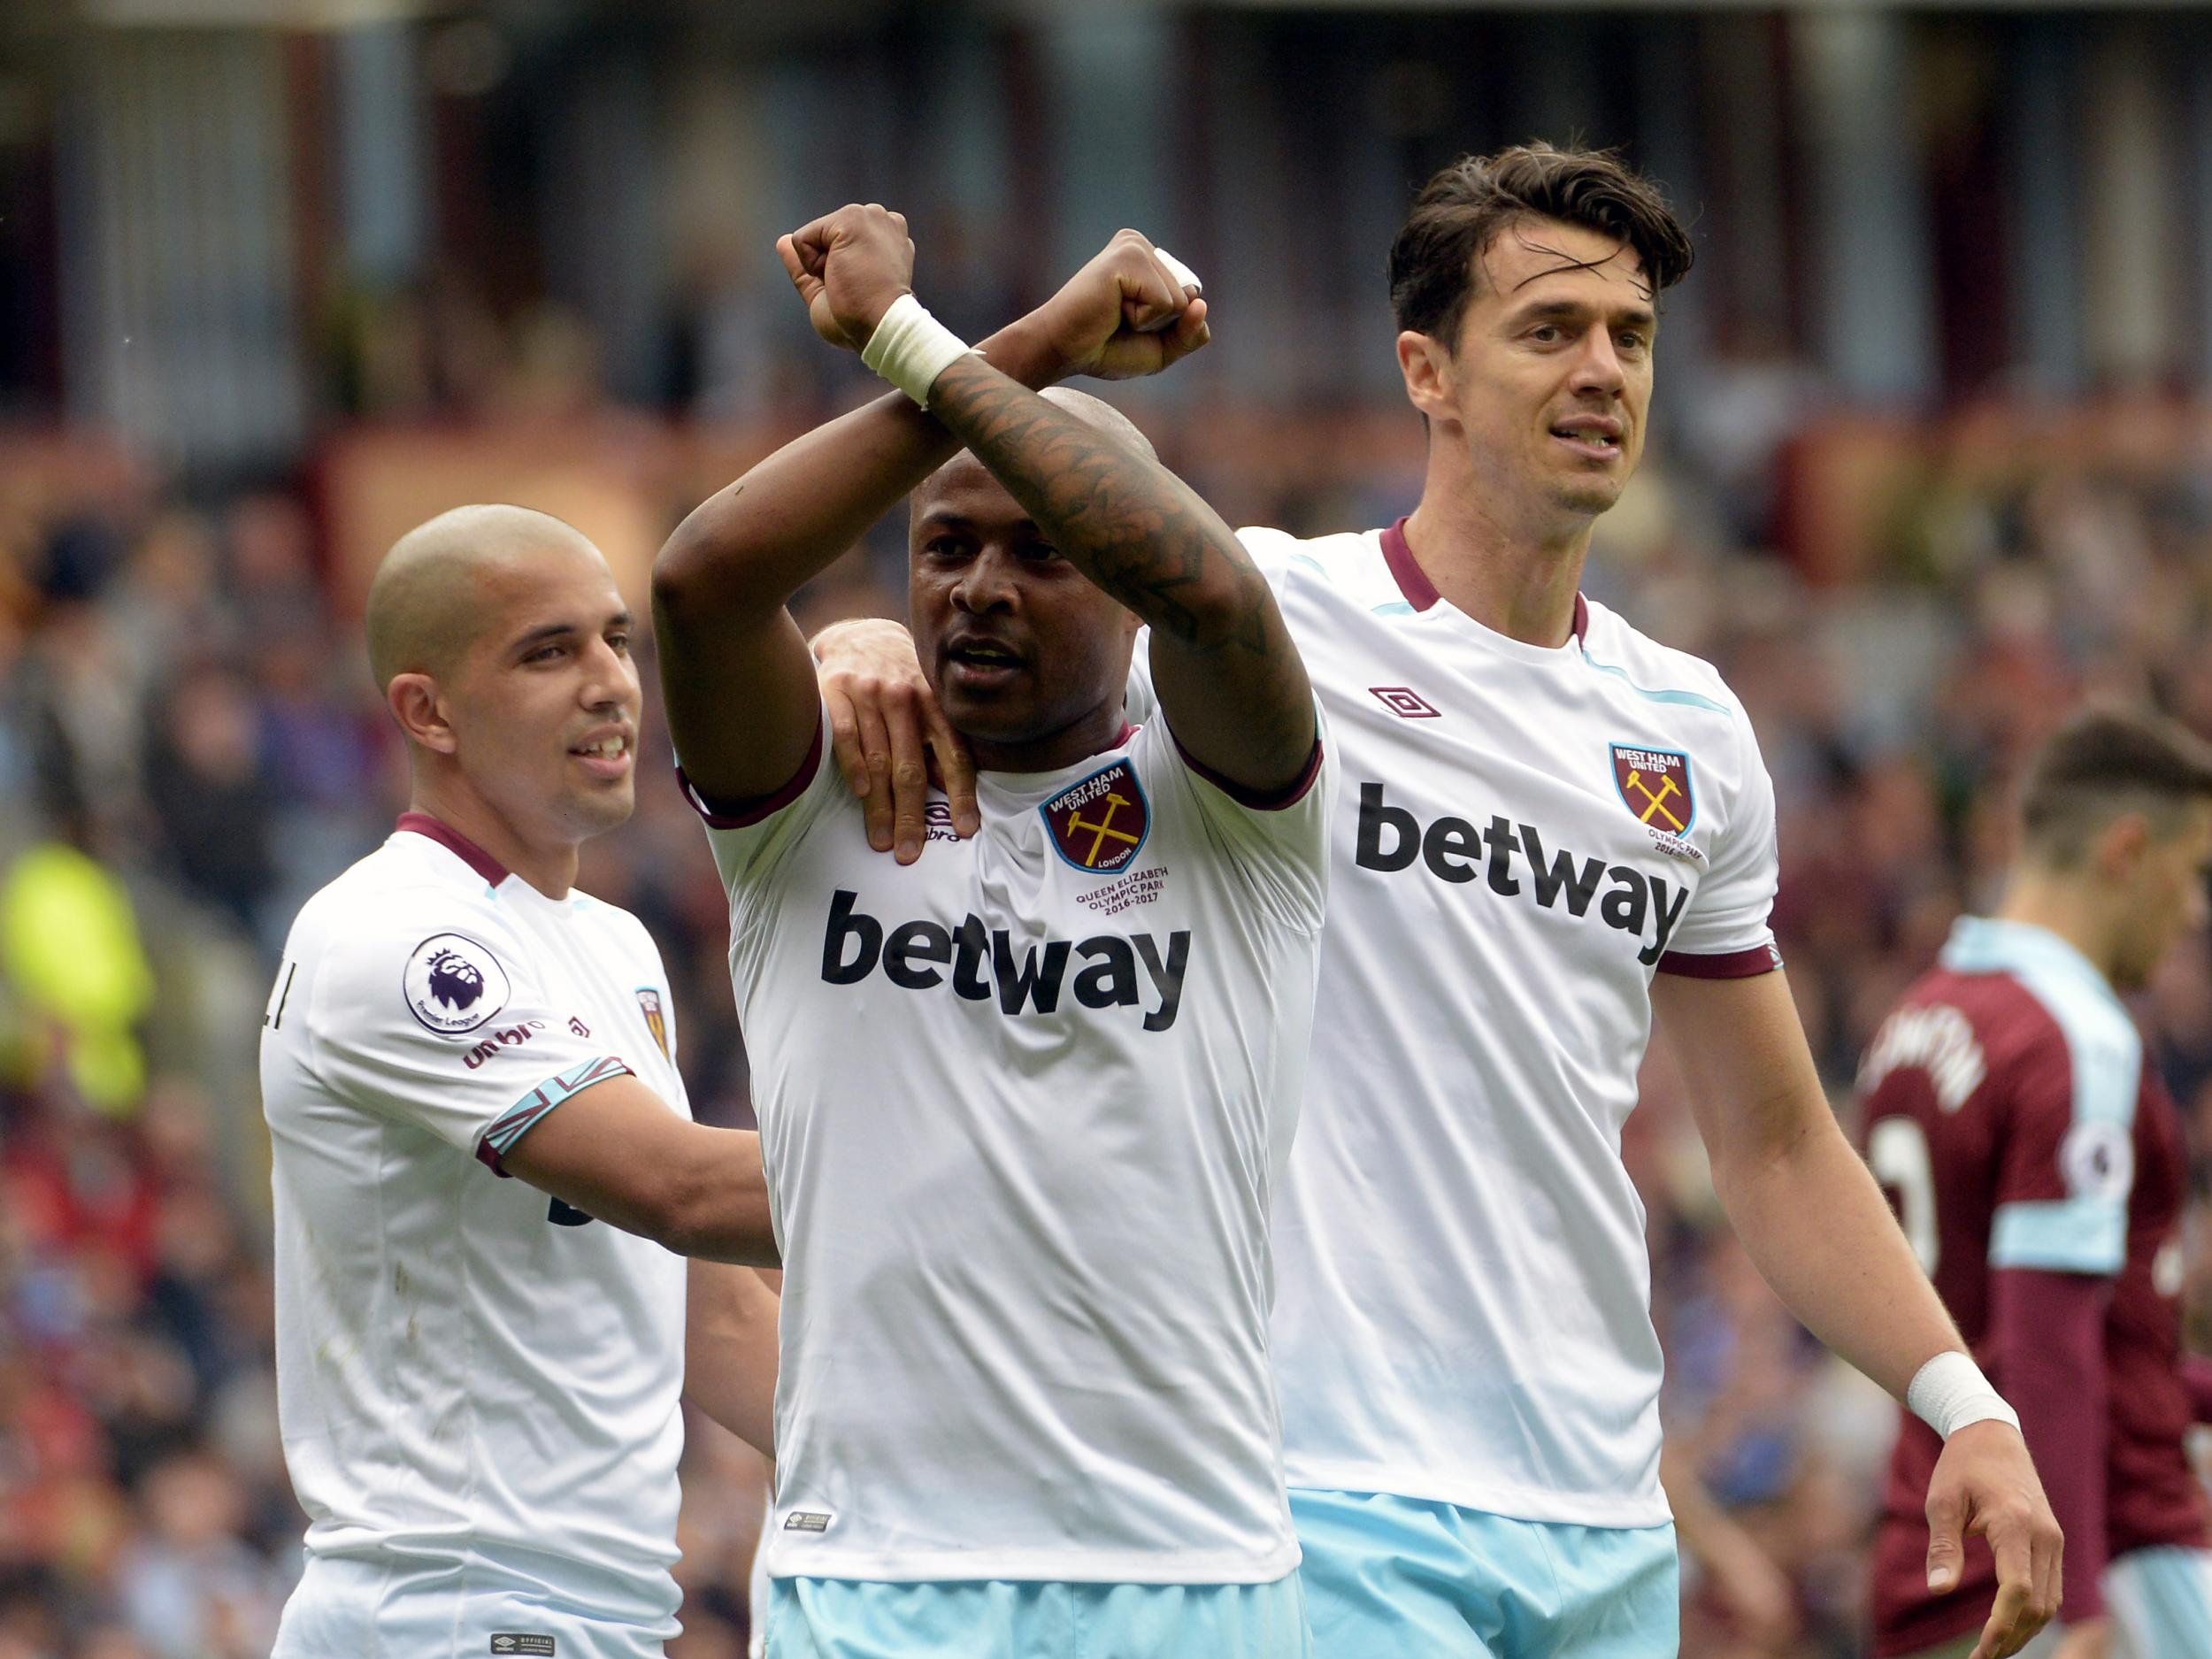 Ayew's final-day goal ensured West Ham finished 11th but he had a quiet season